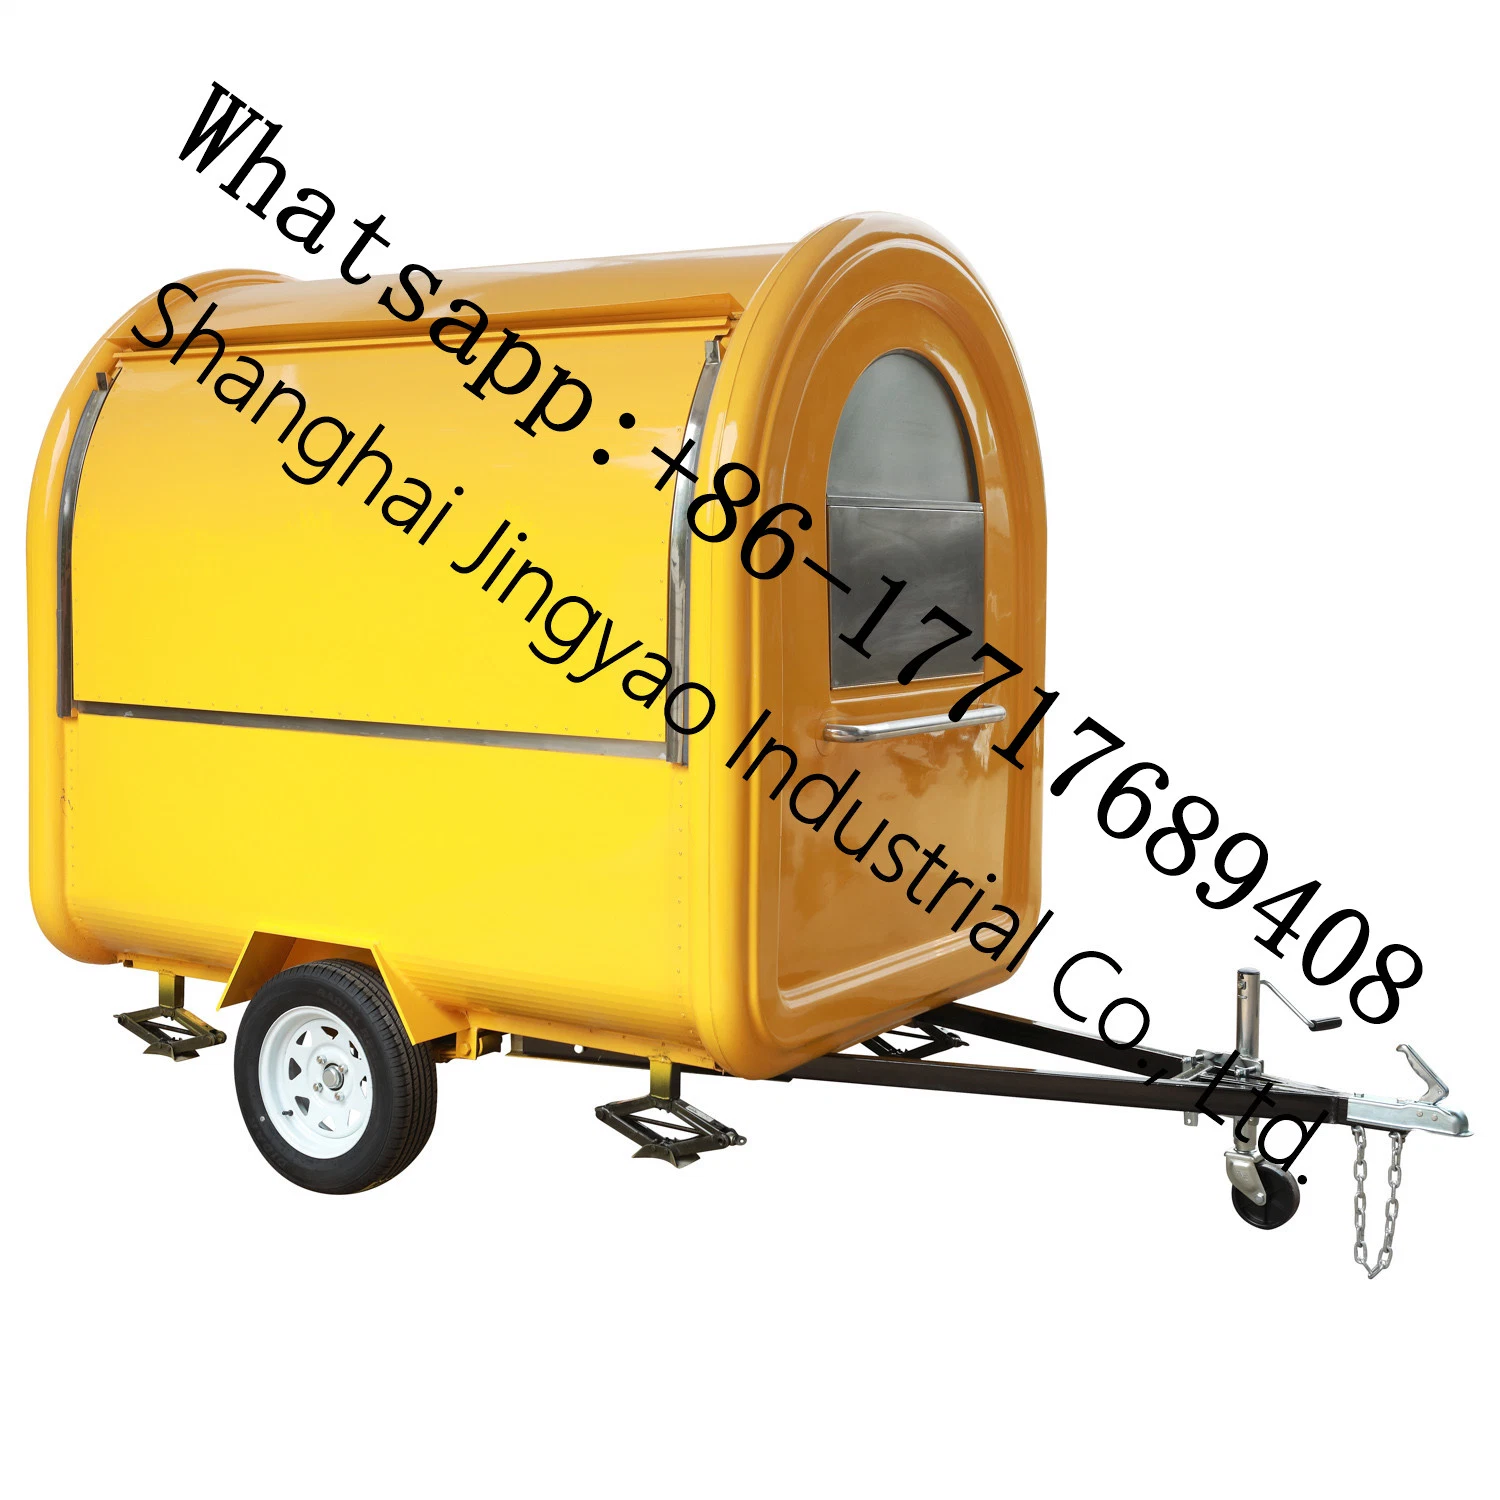 Stainless Steel Mobile Food Cart Trailer Square Service Food Truck Hot Food Trailer Fast Food Vending Truck Food Cart Trailer for Sale